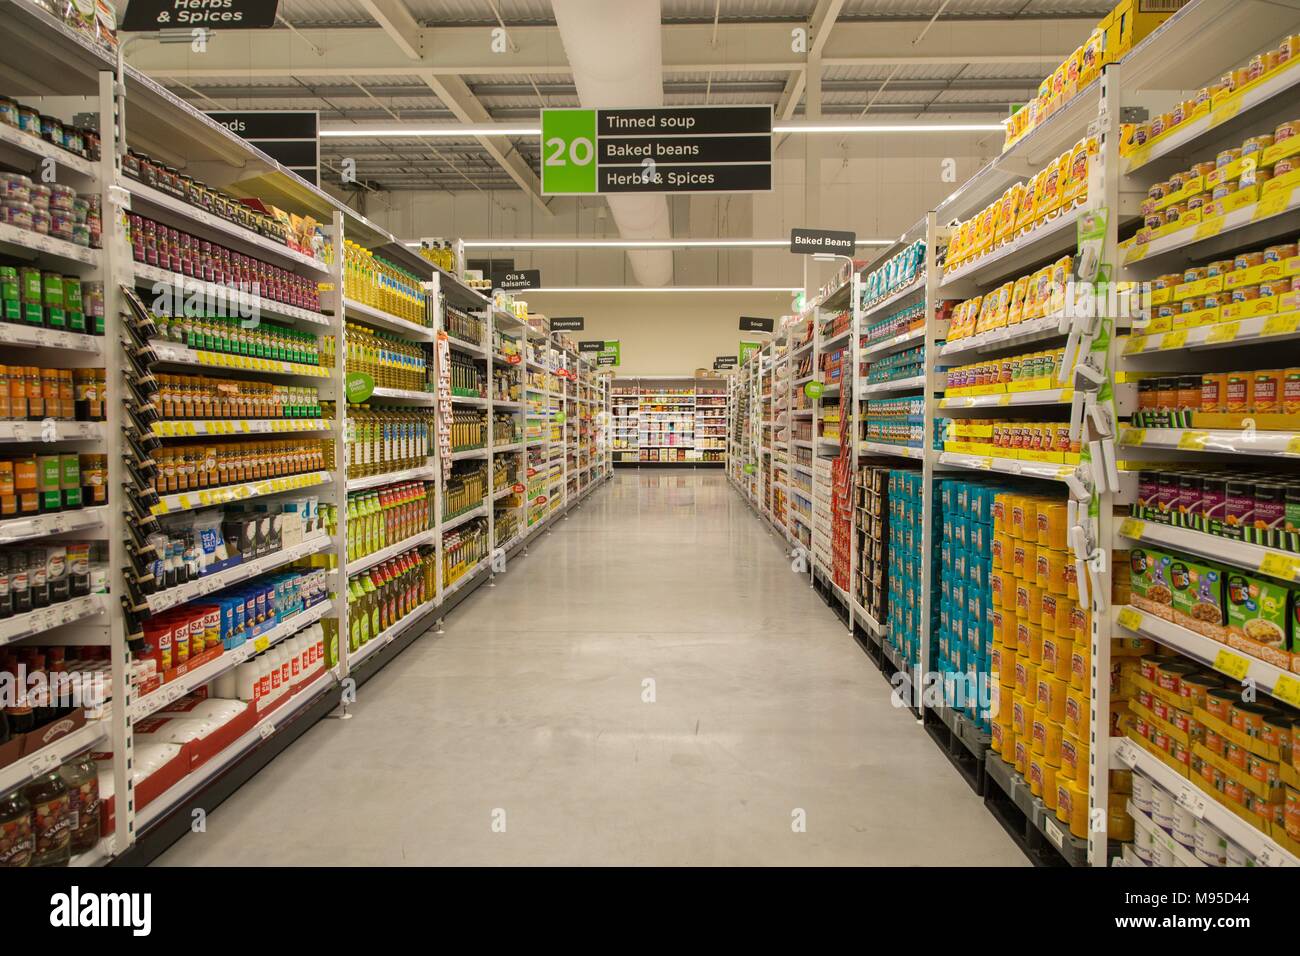 Tinned soup,baked beans,herbs and spices on full shelves in an Asda supermarket. Stock Photo